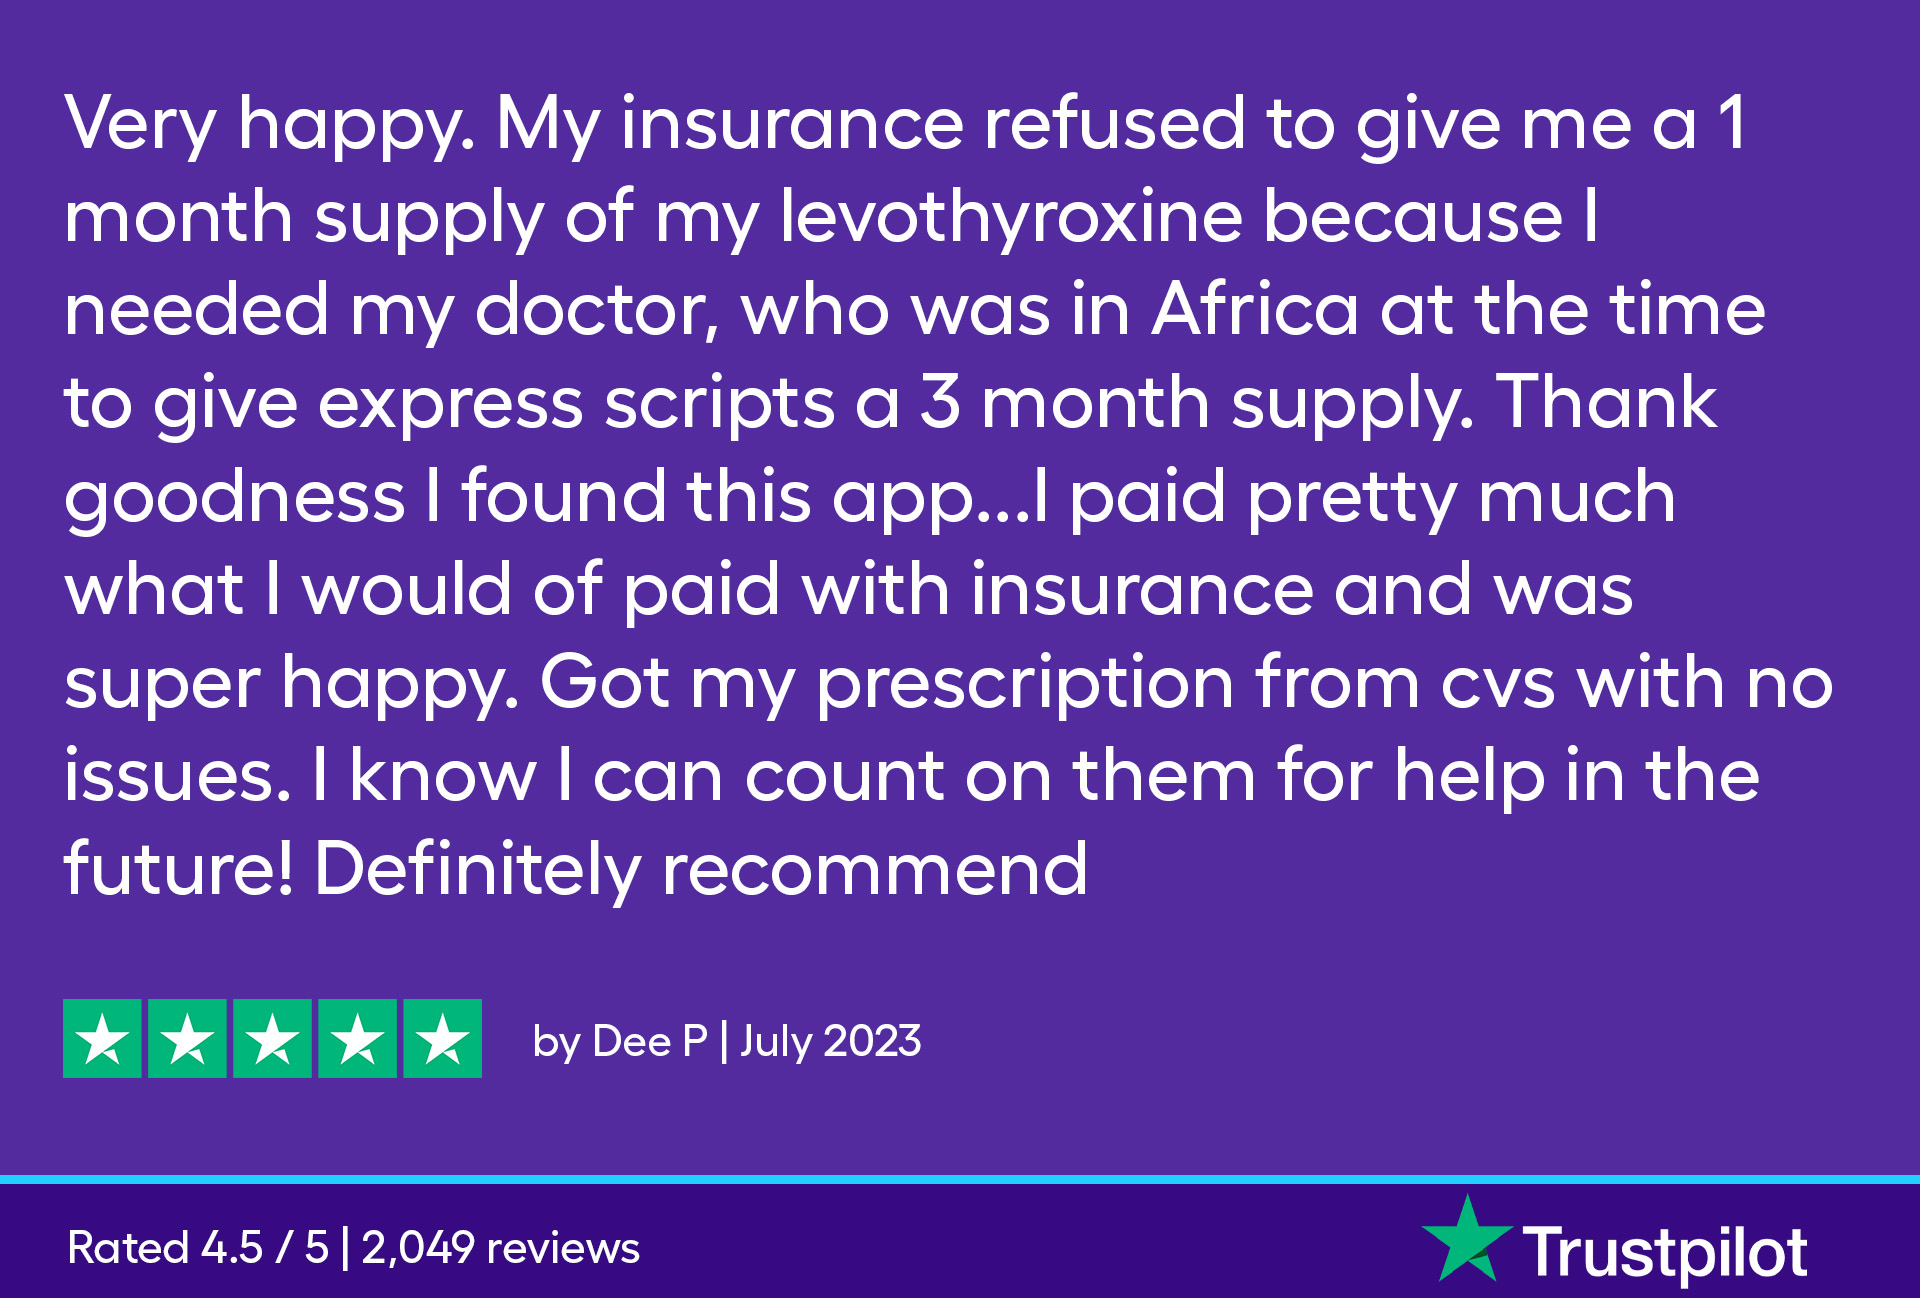 My insurance refused to give me a 1 month supply of my levothyroxine because I needed my doctor, who was in Africa at the time to give express scripts a 3 month supply. Thank goodness I found this app.. I paid pretty much what I would have paid with insurance and was super happy. Got my prescription from CVS with no issues. I know I can count on them for help in the future! Definitely recommend